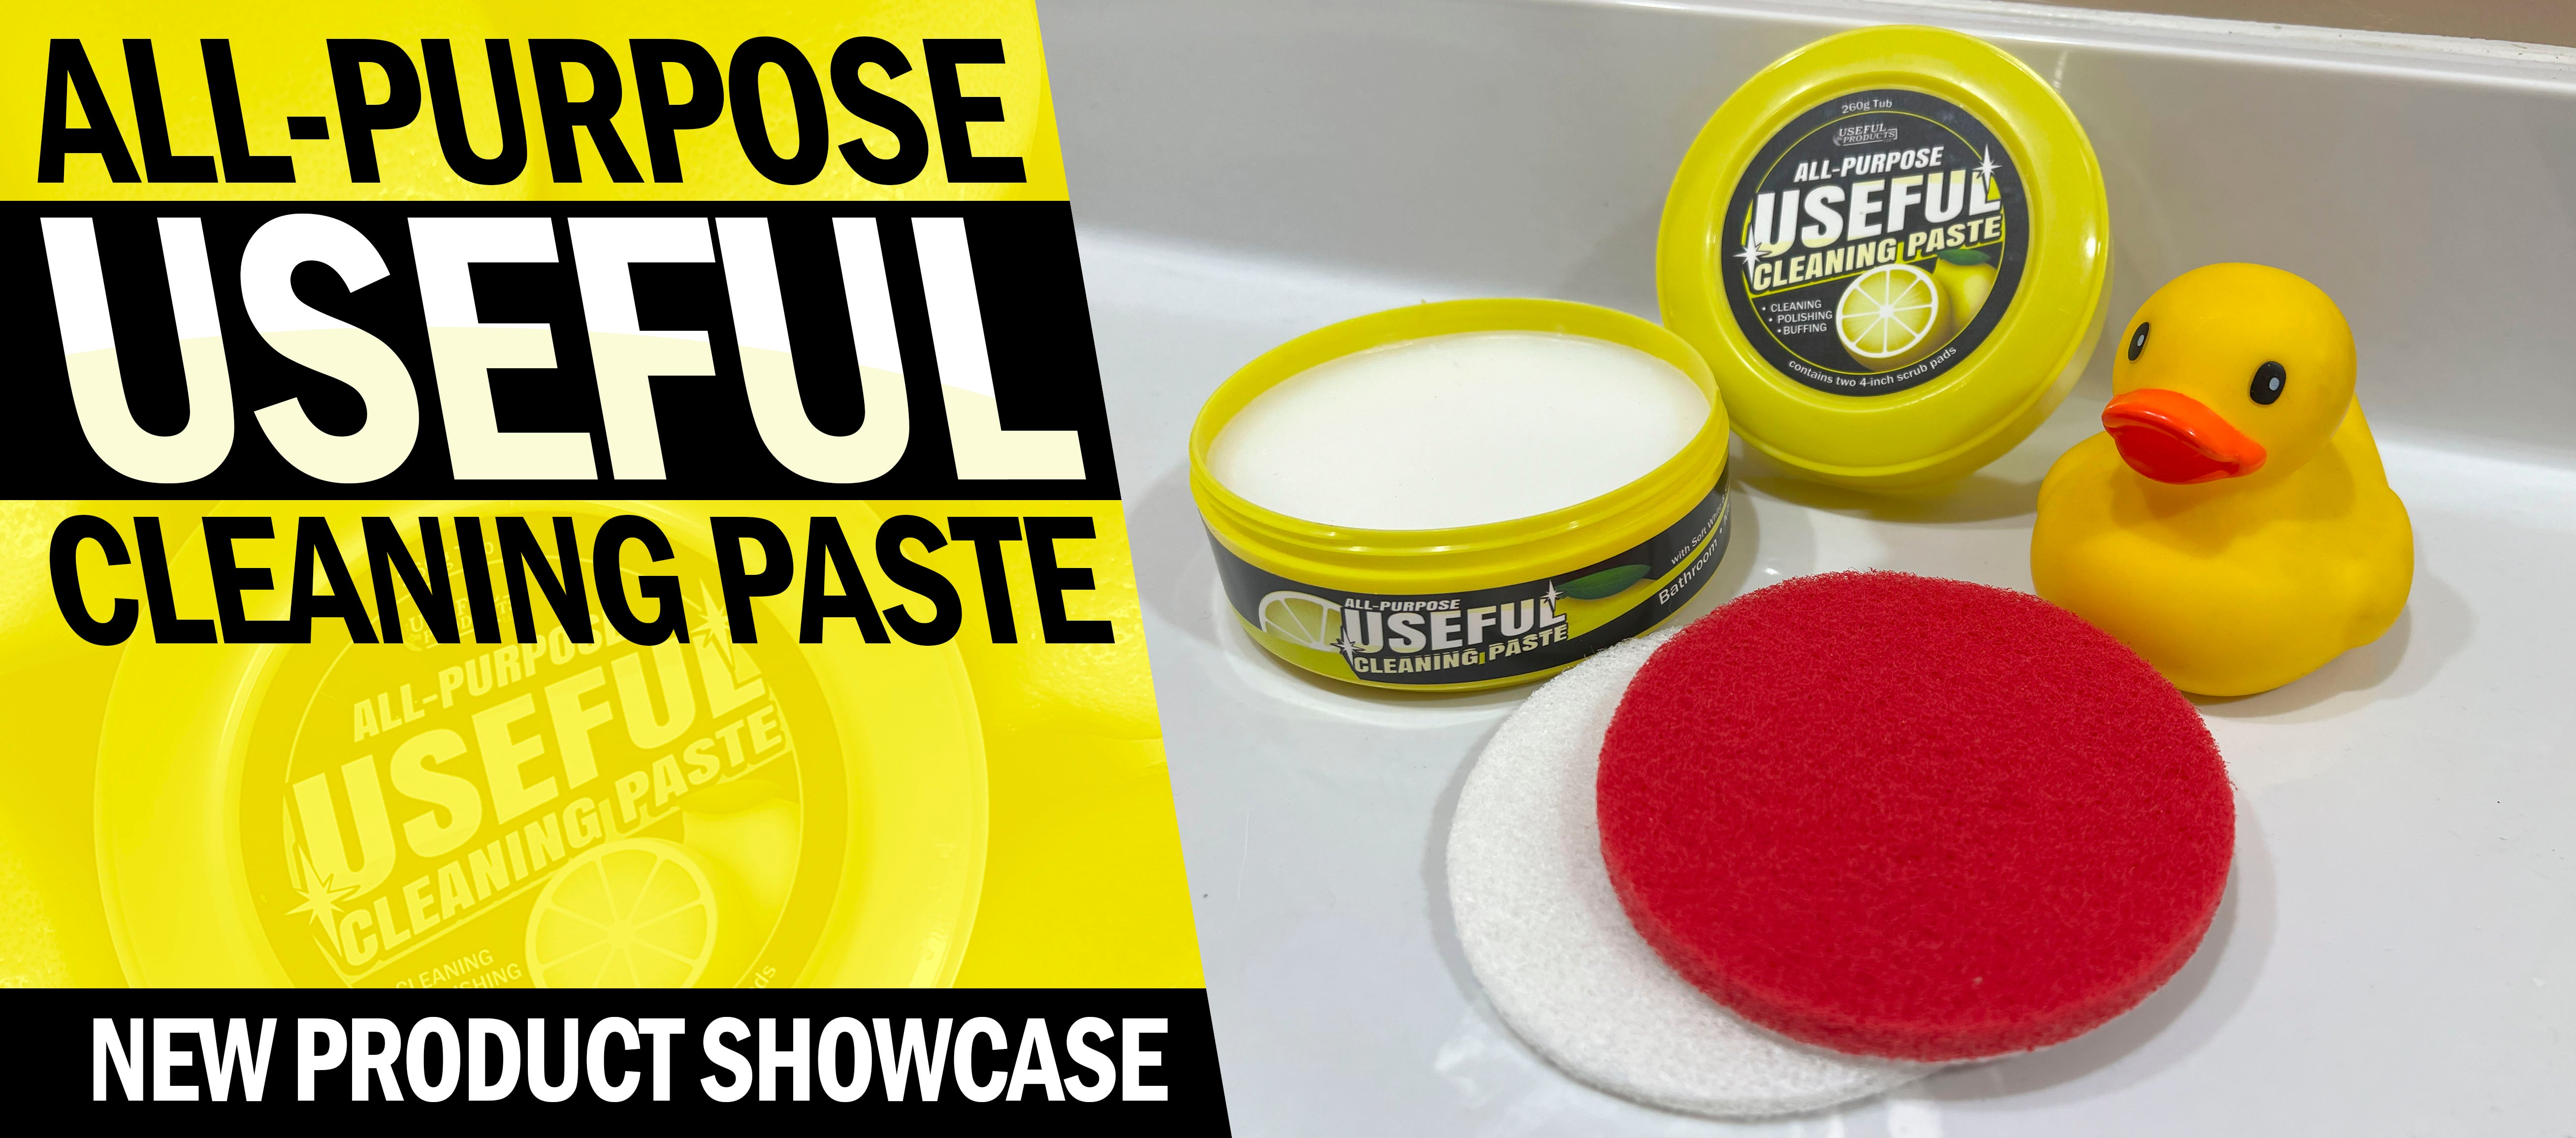 New Cleaning Paste Works Great with Drillbrush - All-Purpose Useful Cleaning Paste Product Spotlight